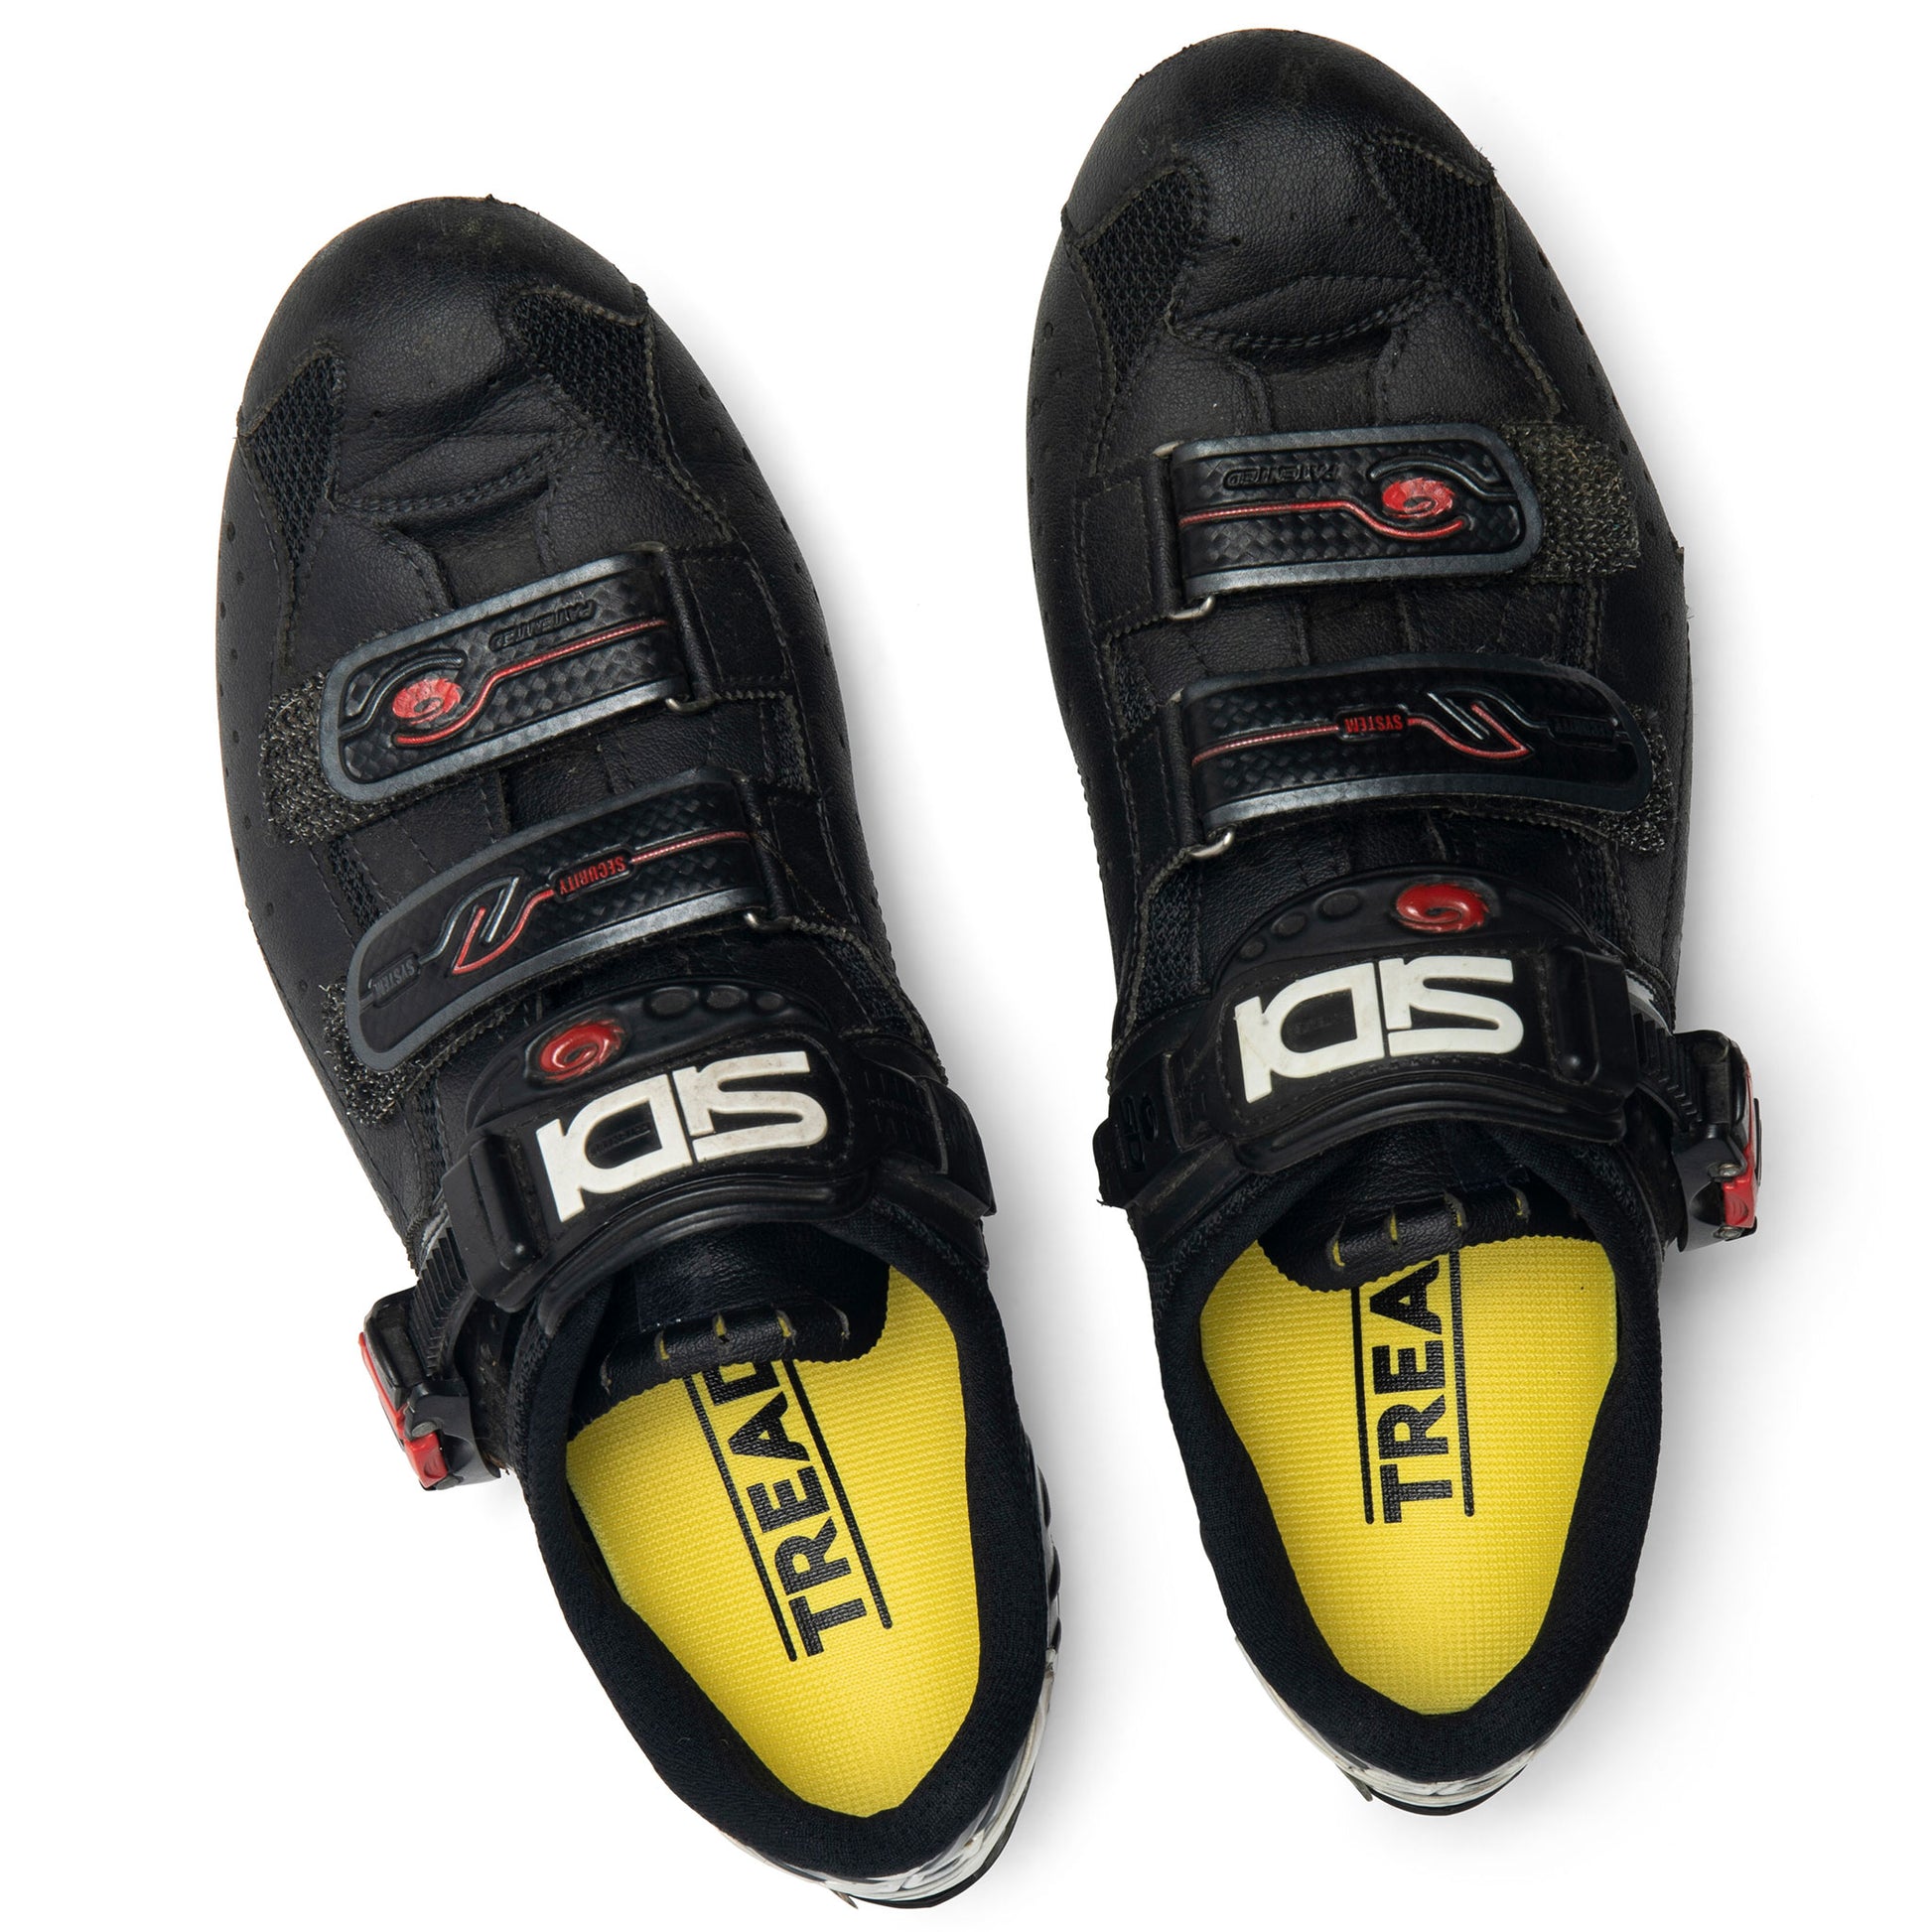 Dash Thin Insole For Cycling Shoes With Carbon Fiber Arch Support